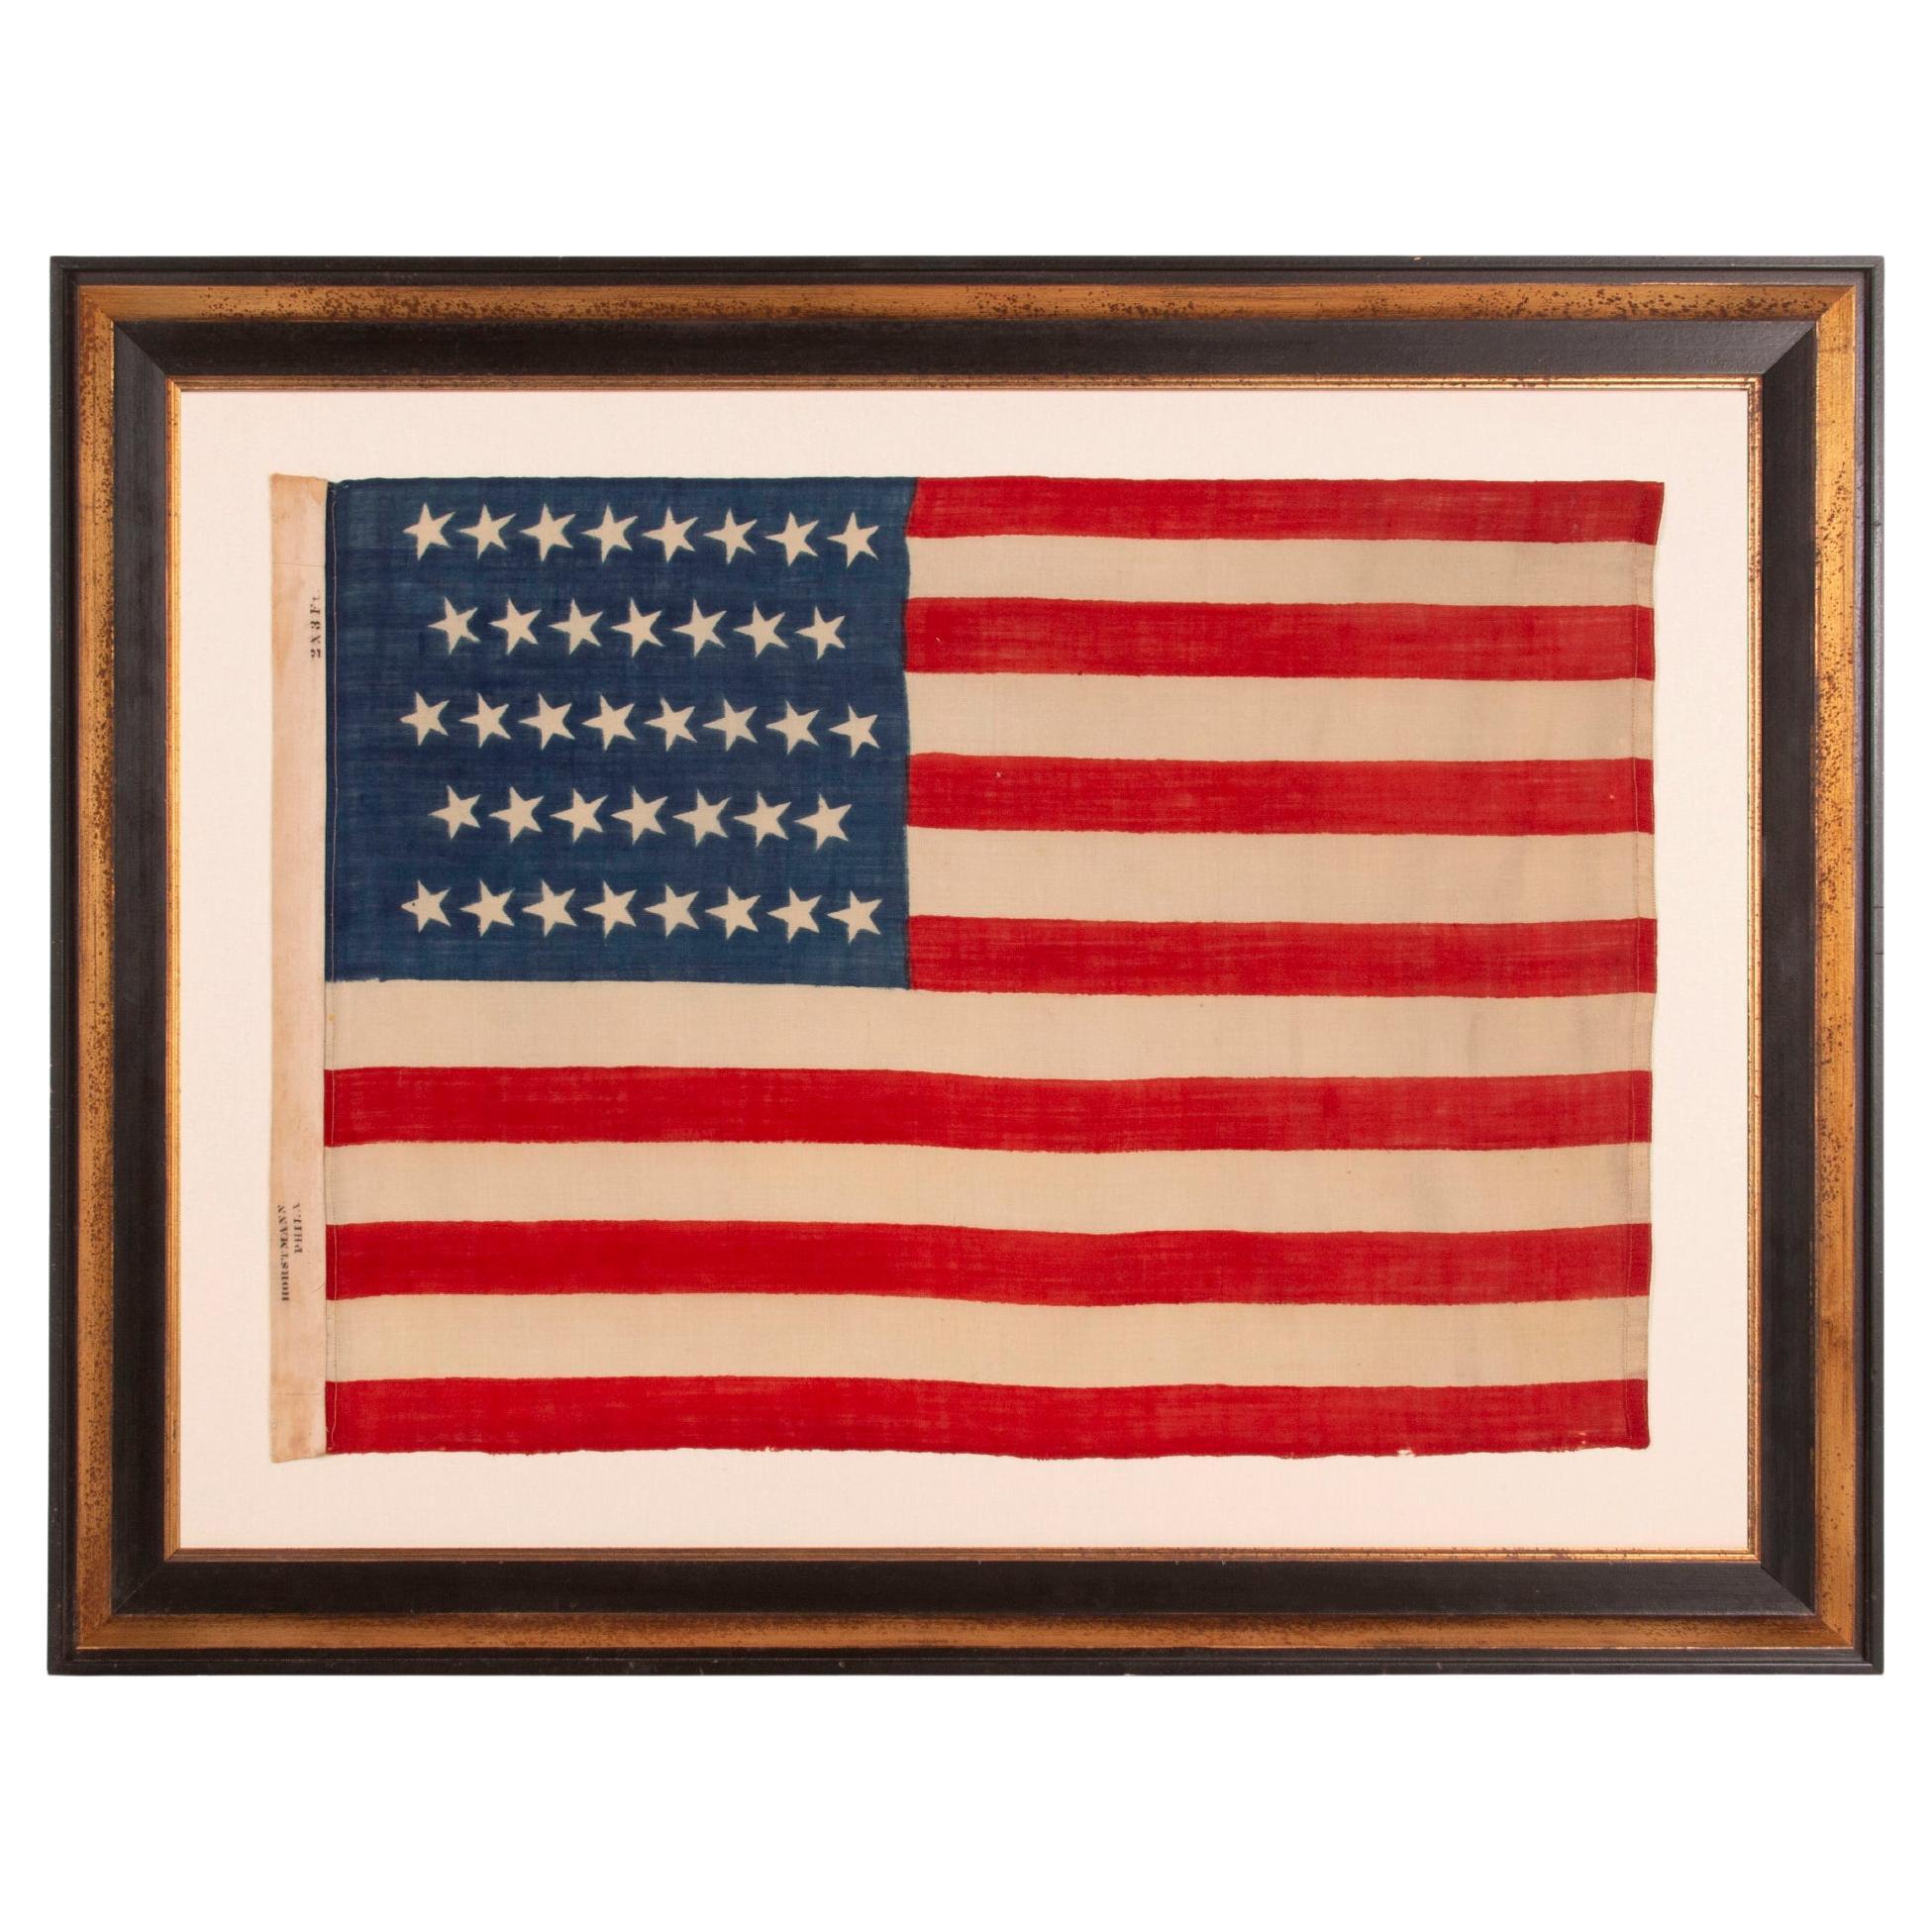 38 Star Antique American Flag by Horstman Brothers, Colorado Statehood, ca 1876 For Sale